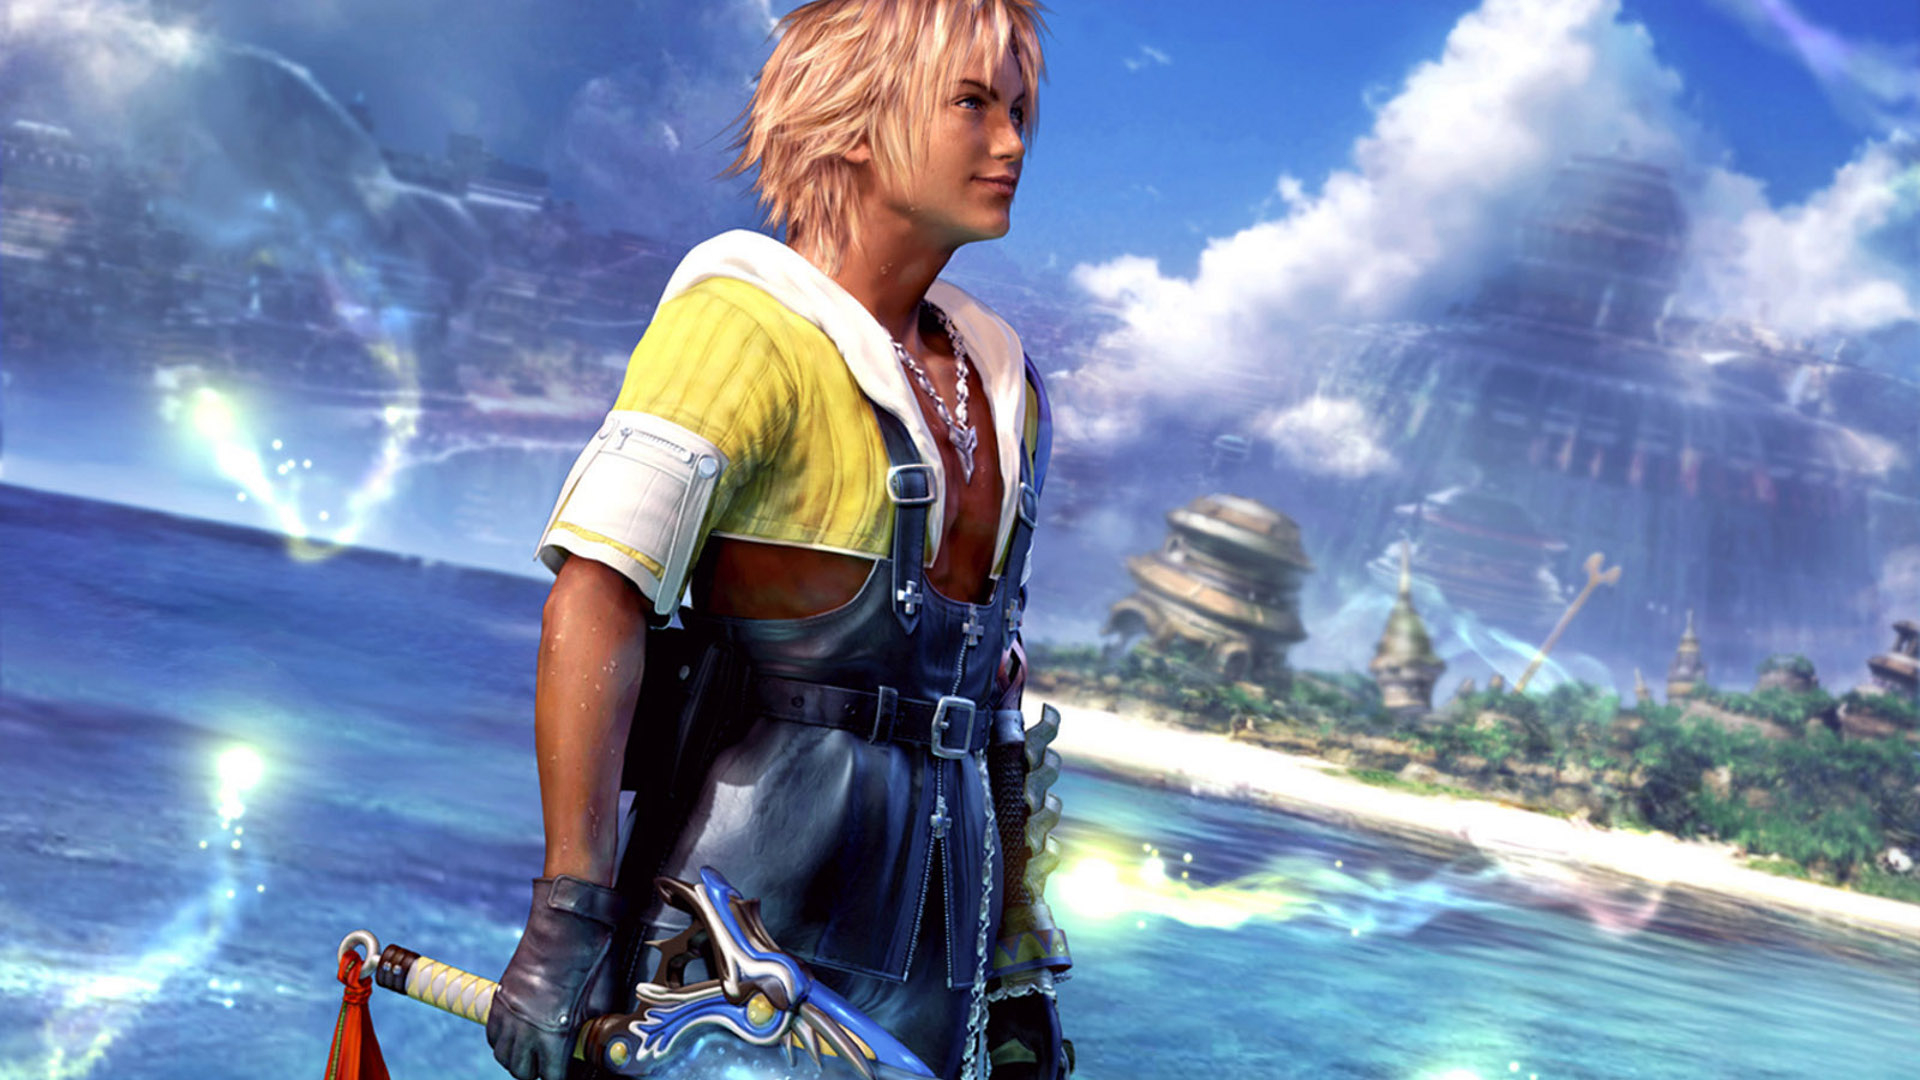 1920x1080 10+ Tidus (Final Fantasy) HD Wallpapers and Backgrounds